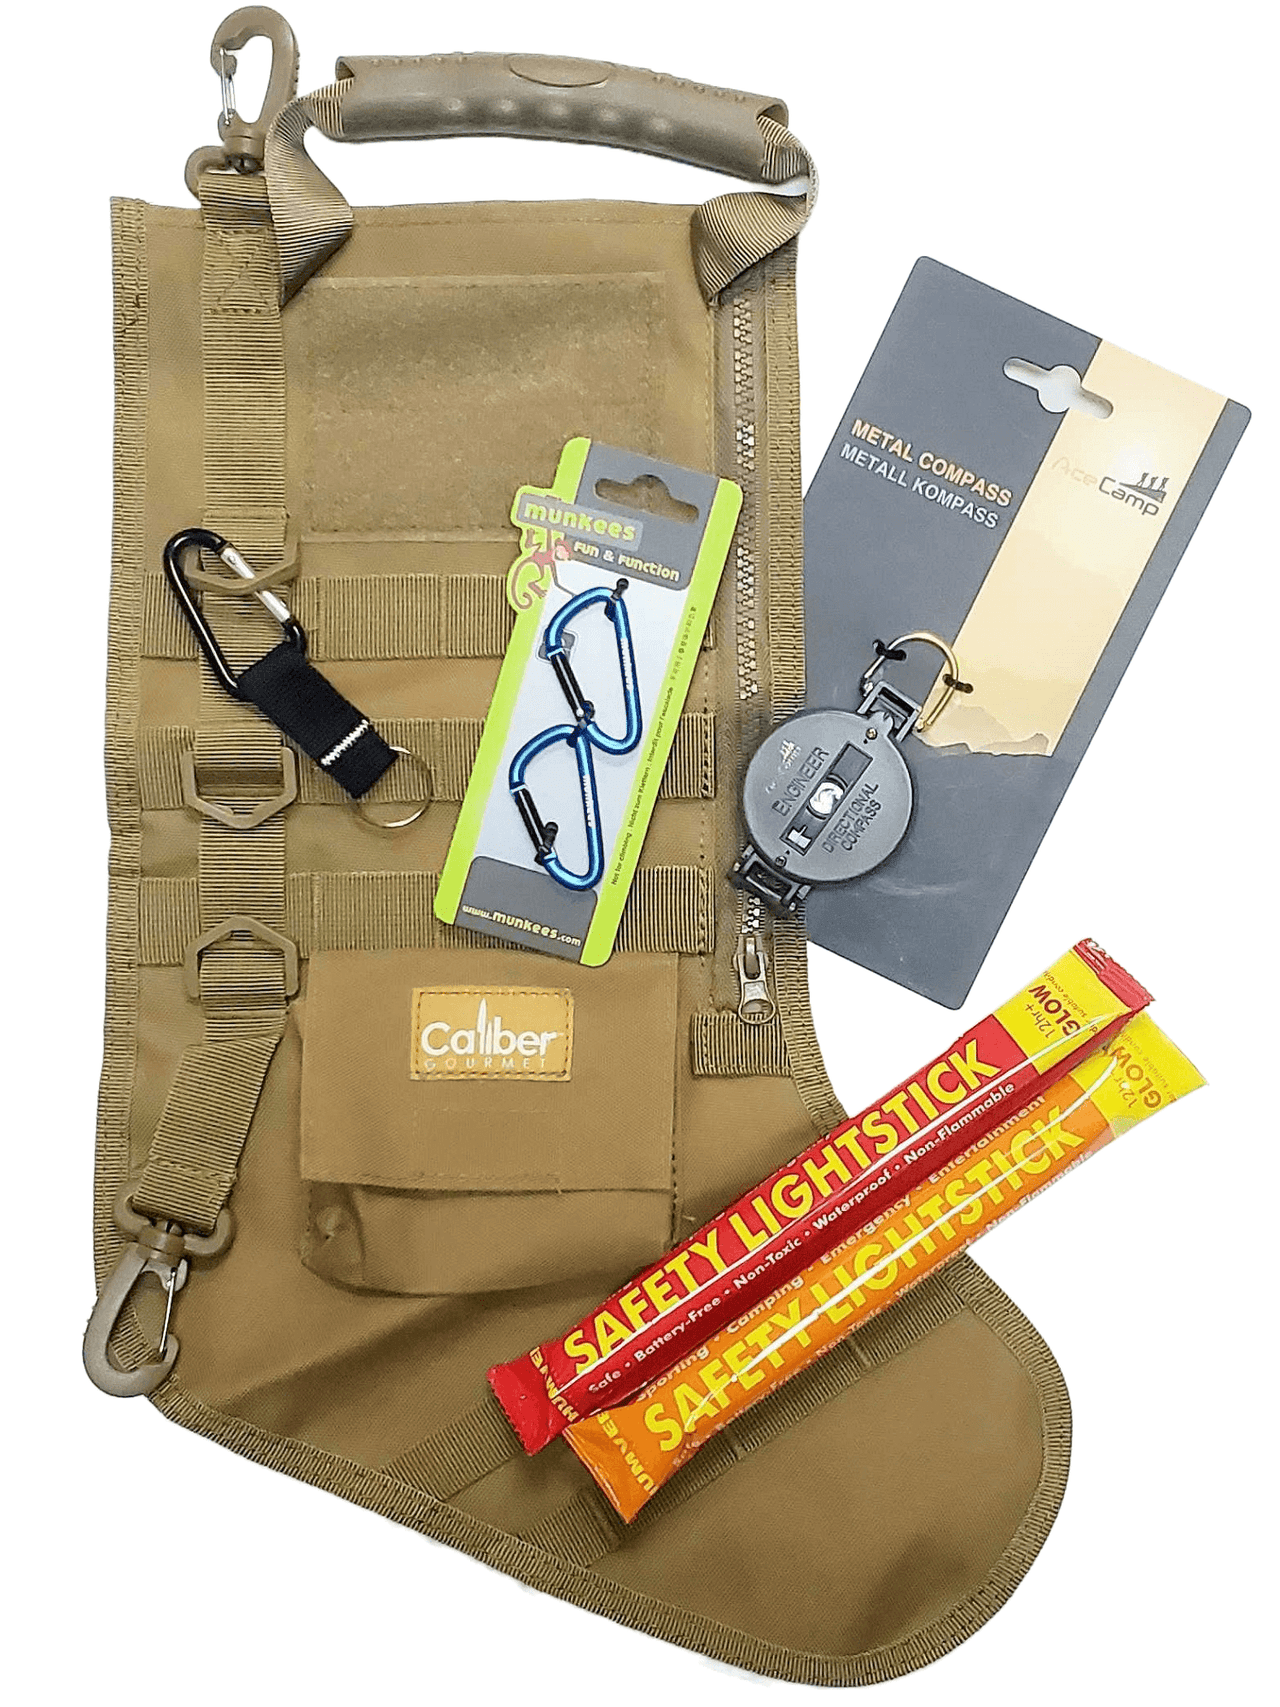 Tactical MOLLE Stockings for Christmas Gifting